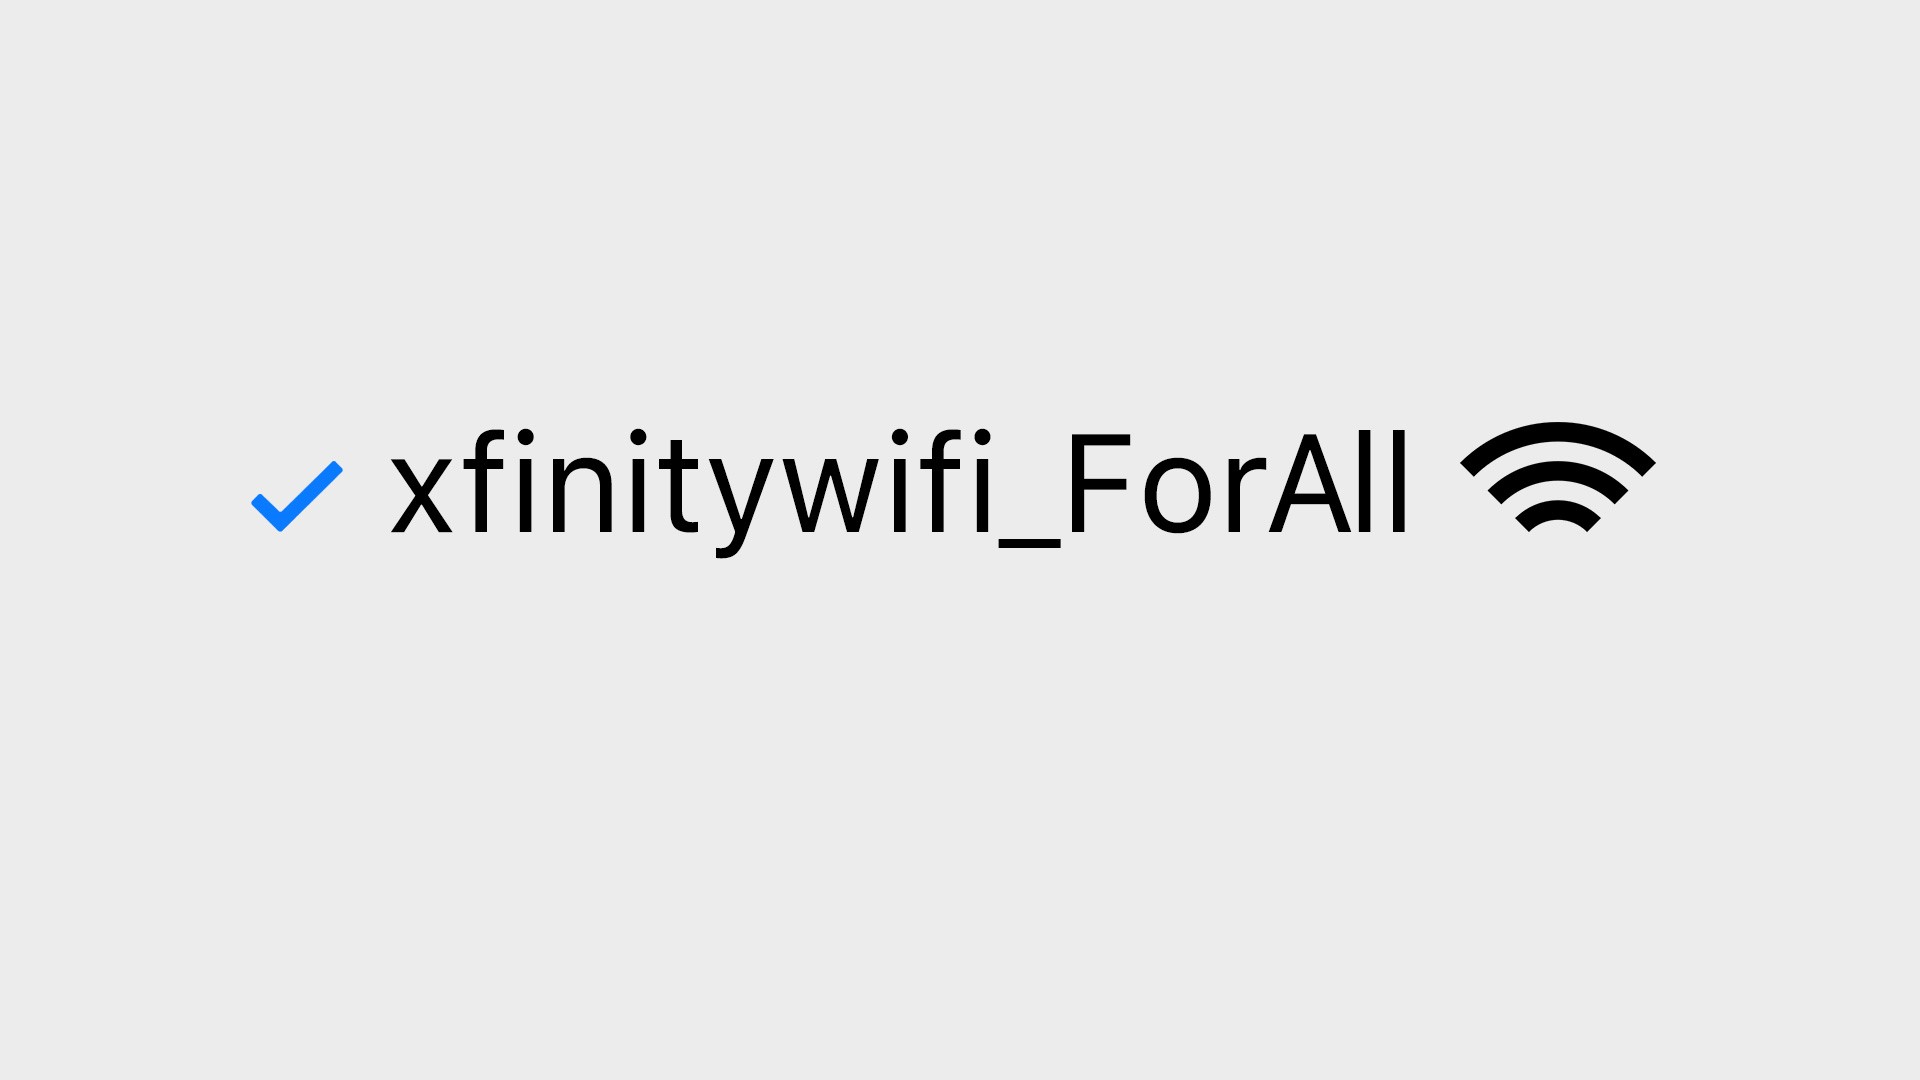 A wifi connectivity symbol next to the words "xfinitywifi_ForAll".